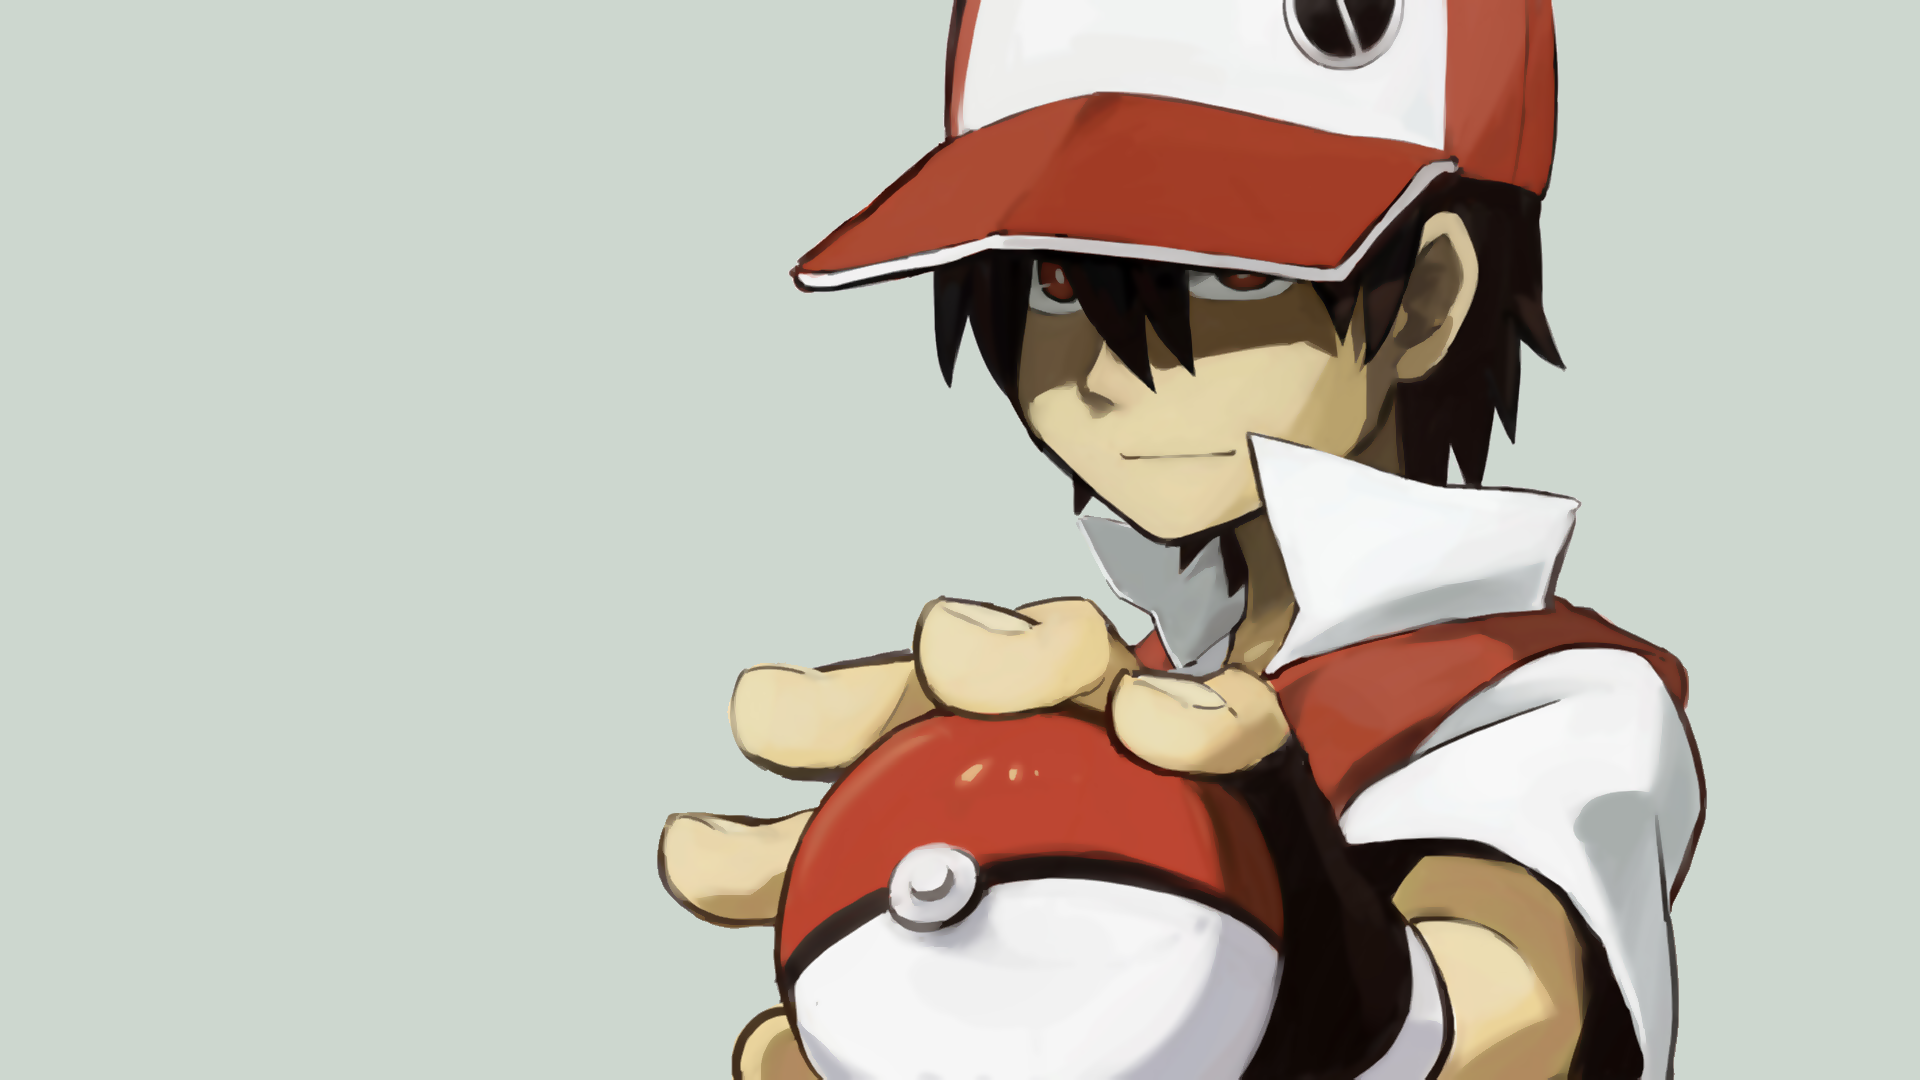 Pokemon Red Character Anime Red Eyes Anime Boys 1920x1080